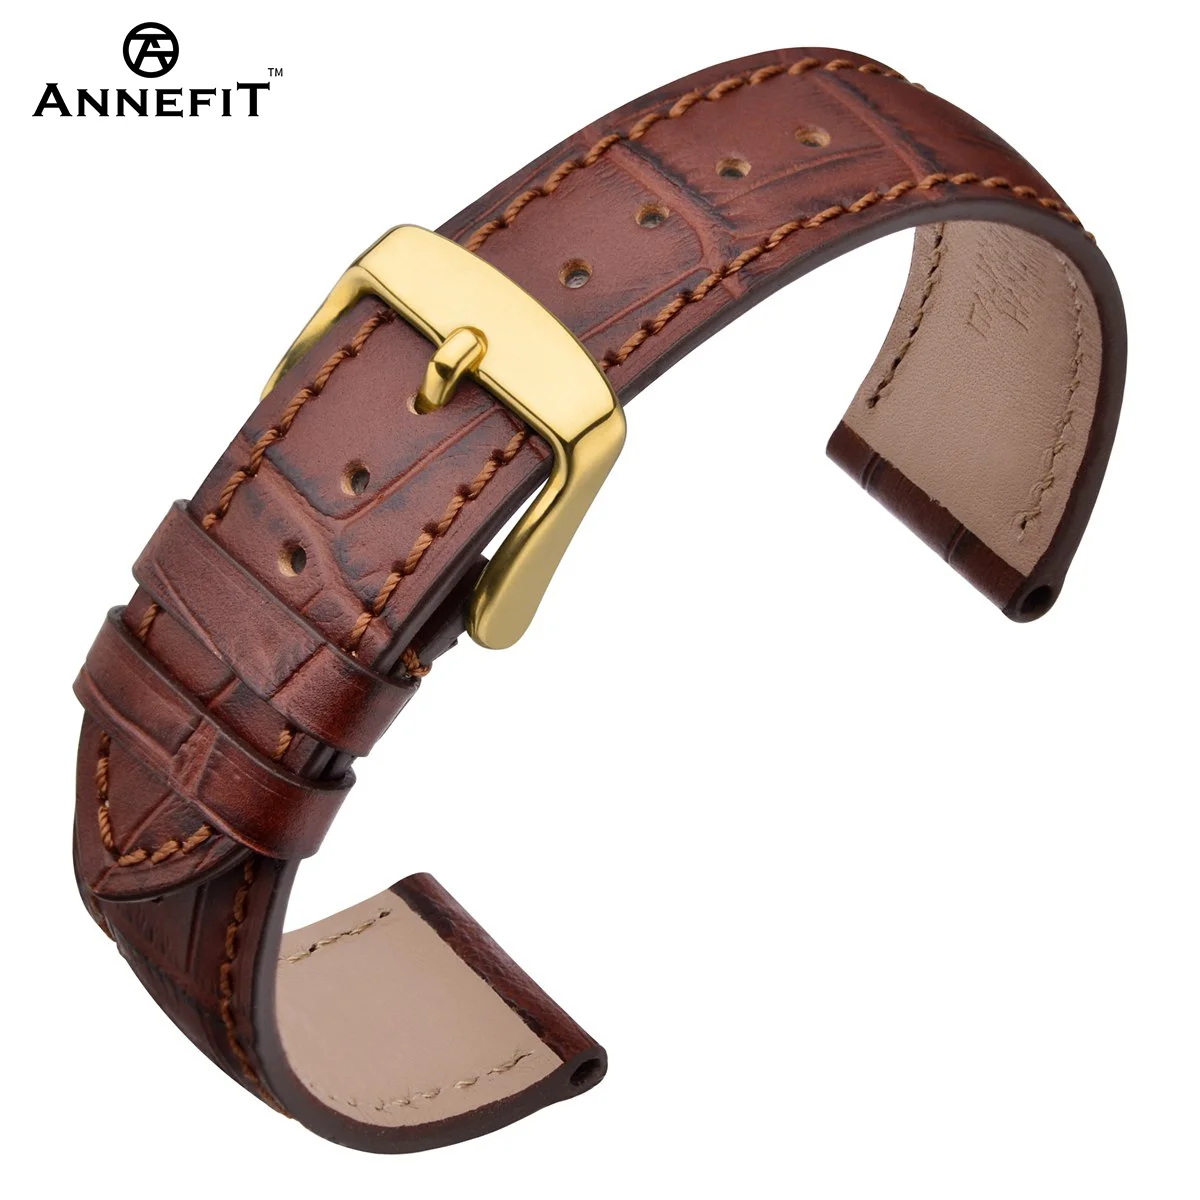 

ANNEFIT Italian Leather Watch Band, Embossed Alligator Grain, 18mm 20mm 22mm Bracelet, Quick Release, Stainless Steel Buckle